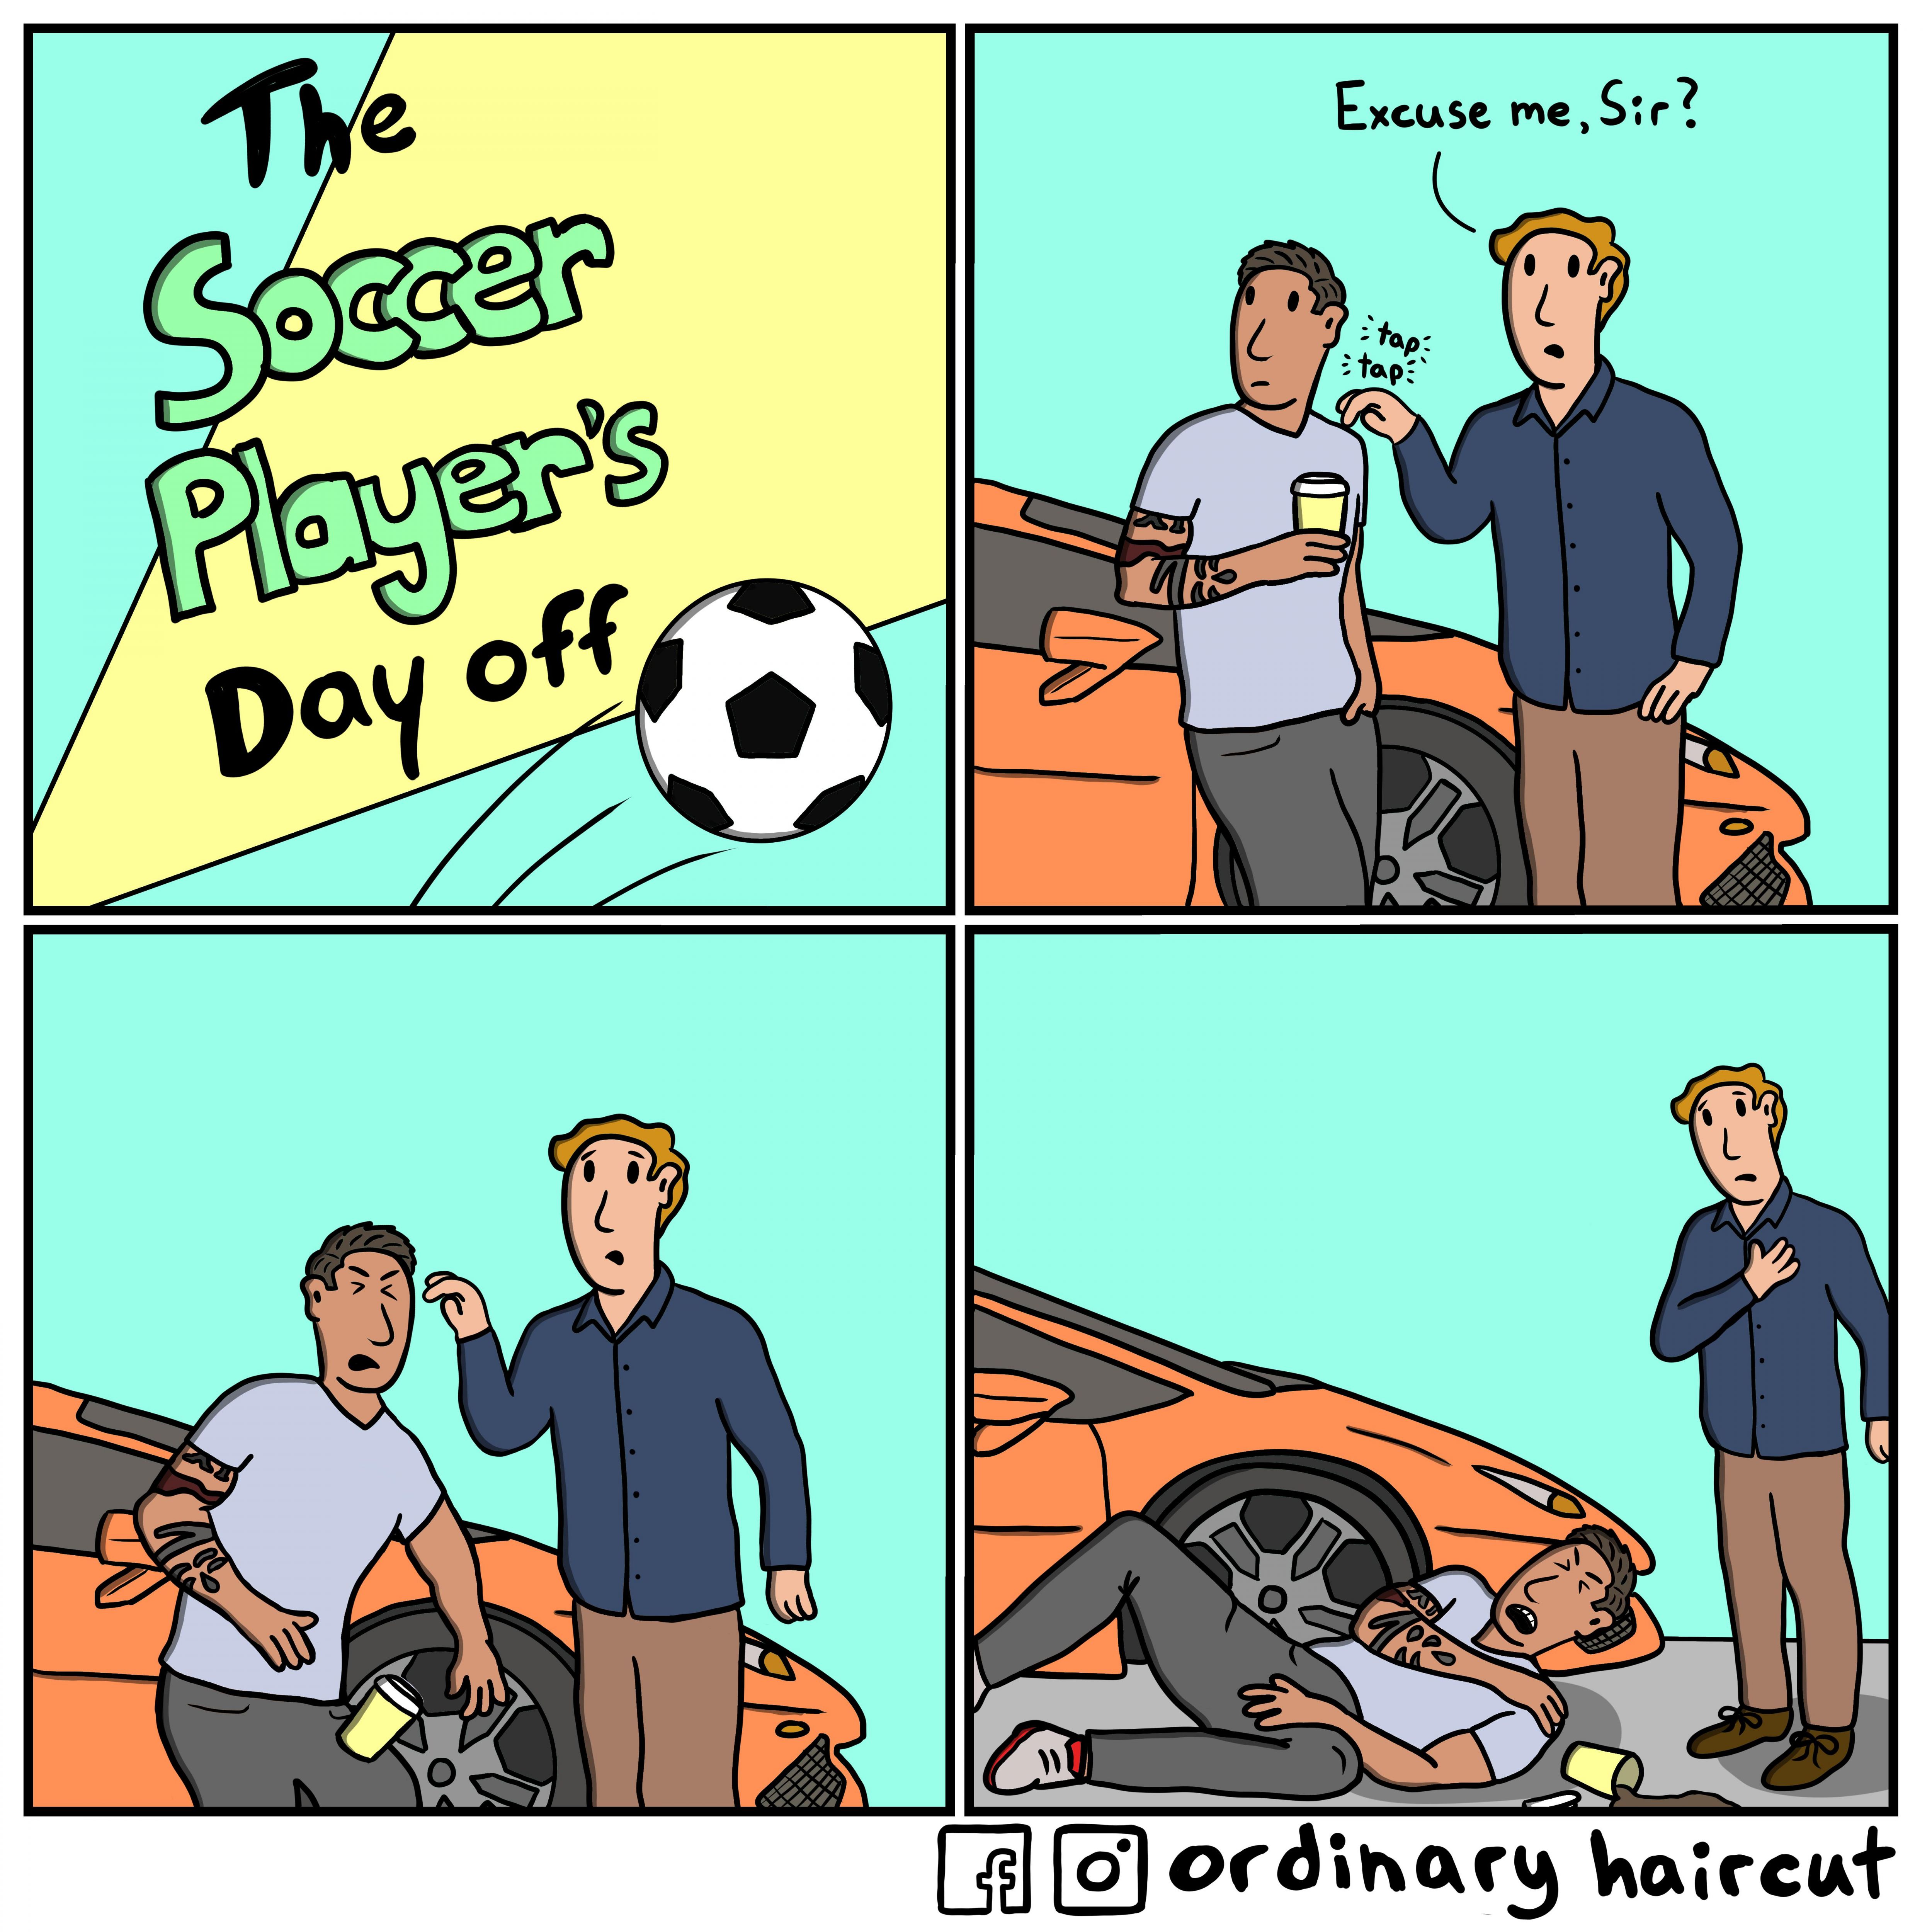 The Soccer Player's Day Off